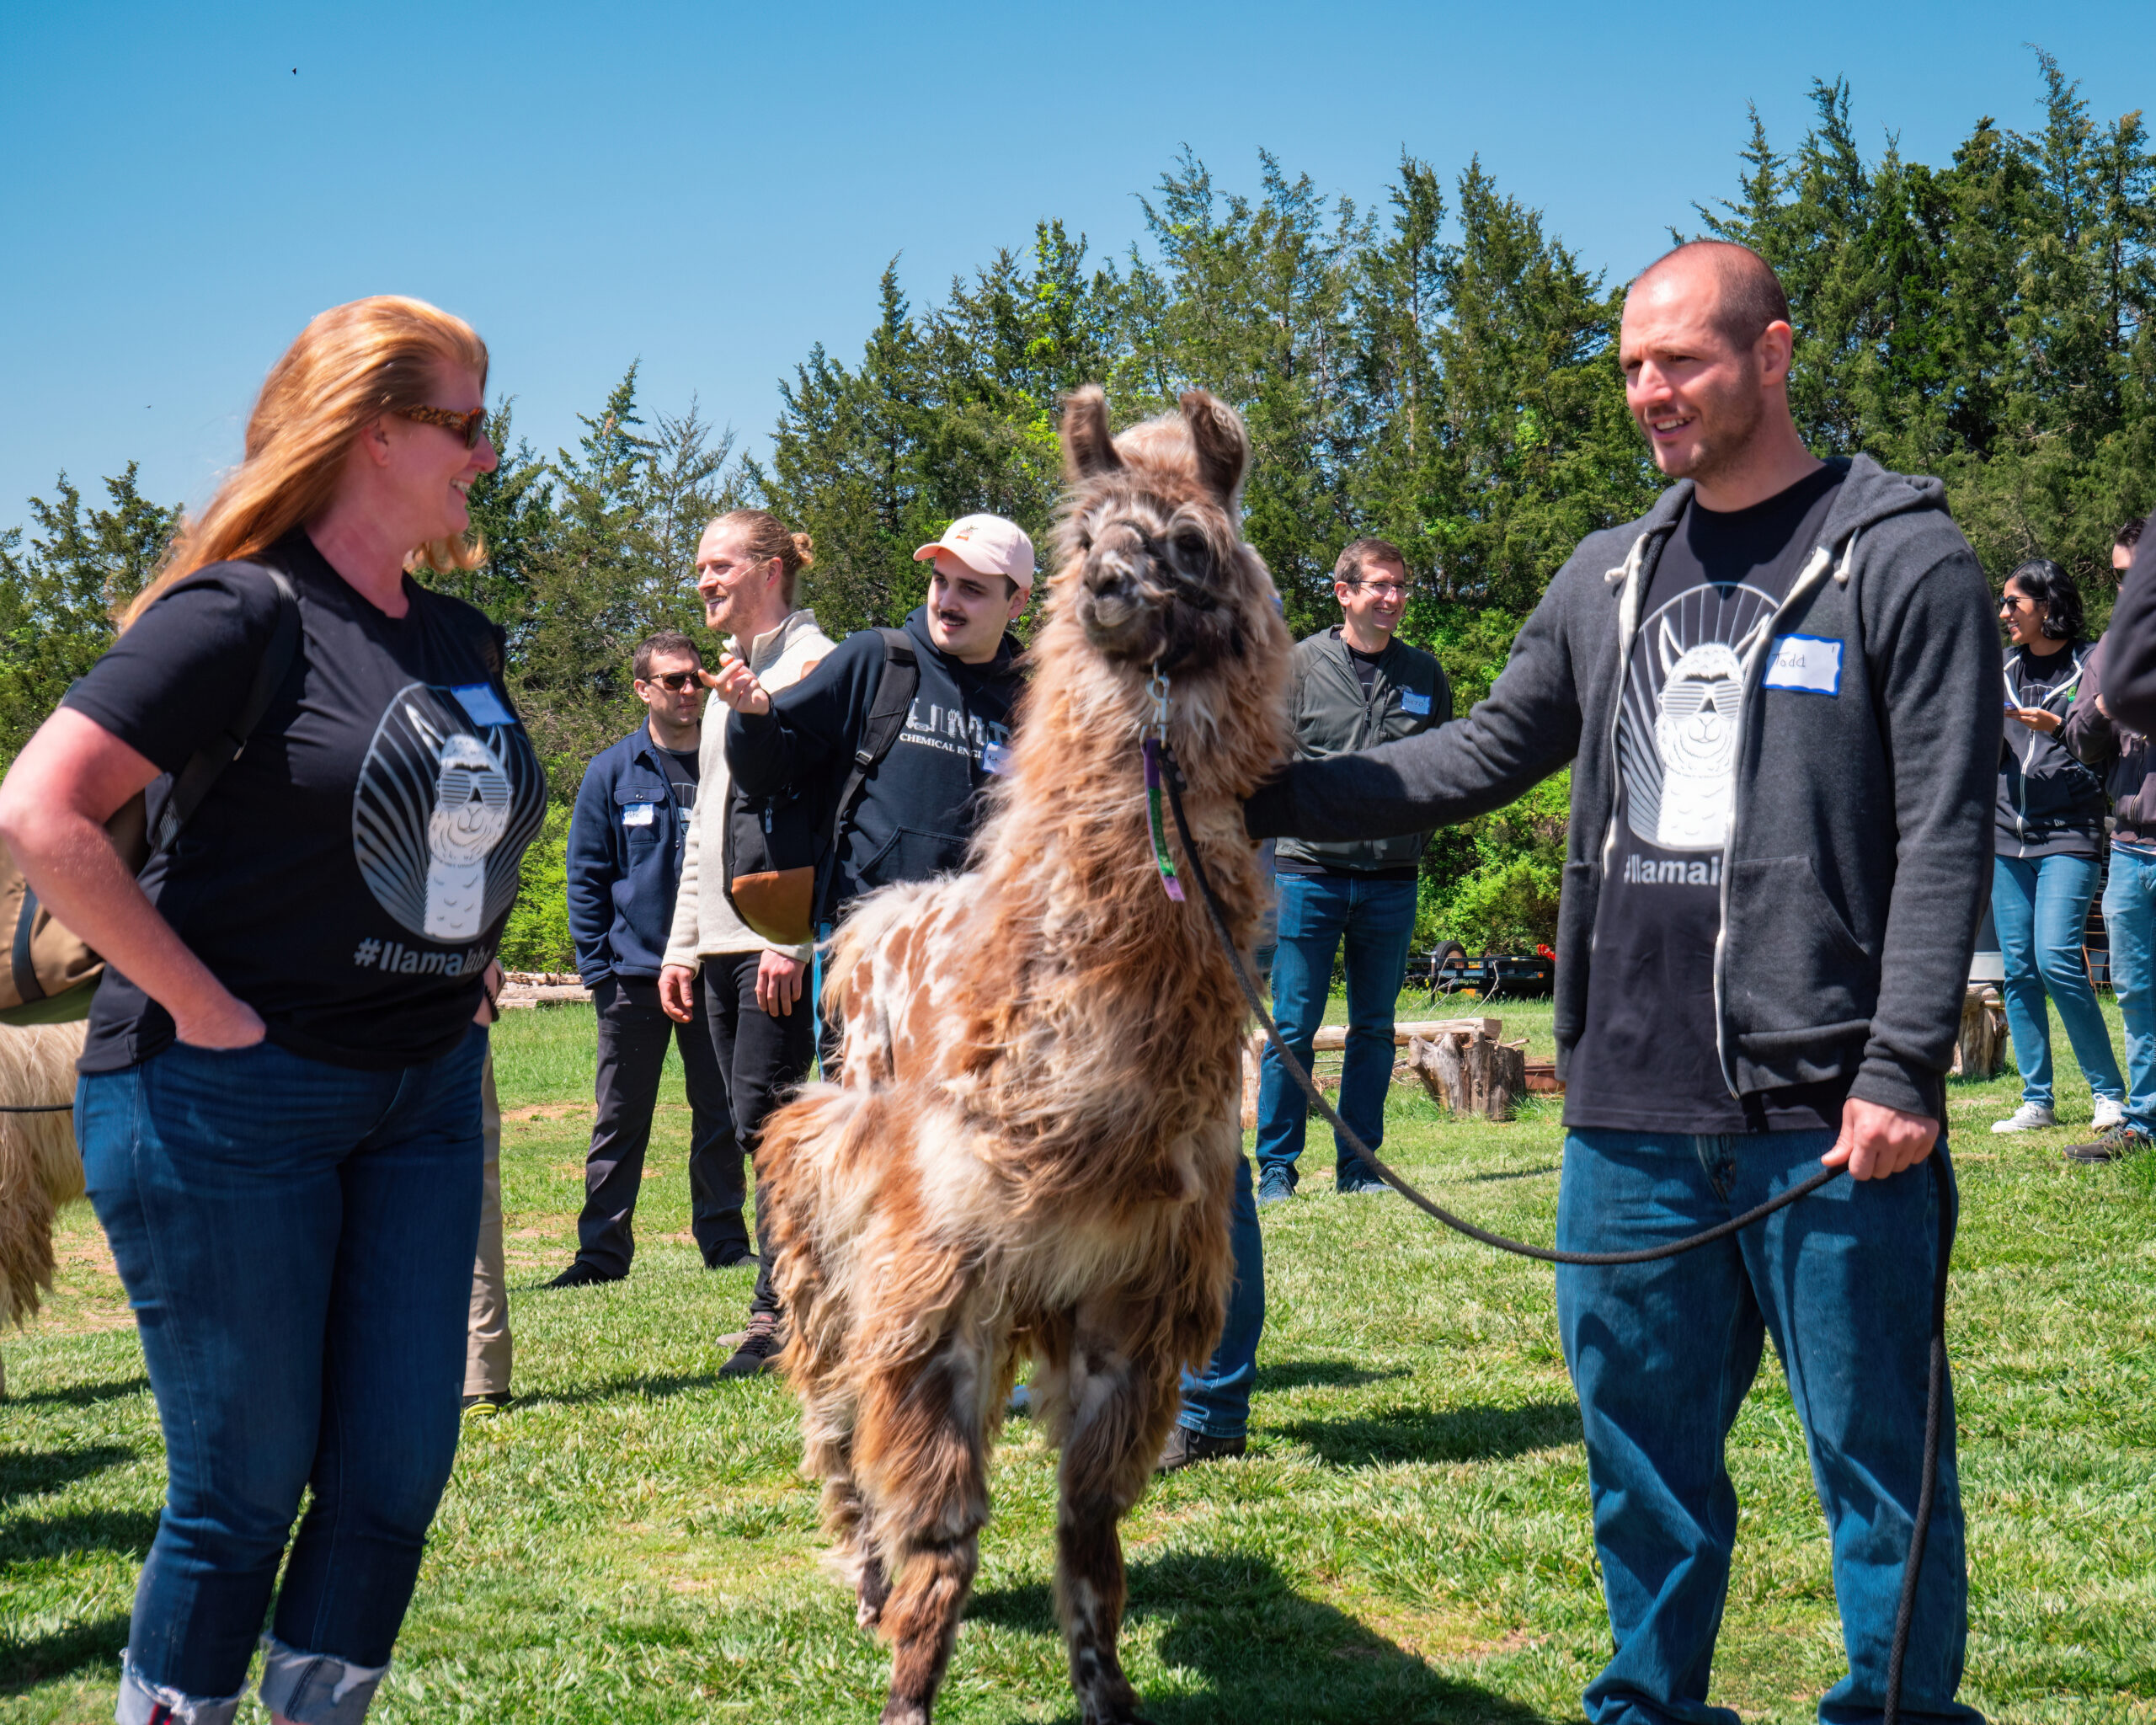 A photo of RTS's annual Llama Party team-building event